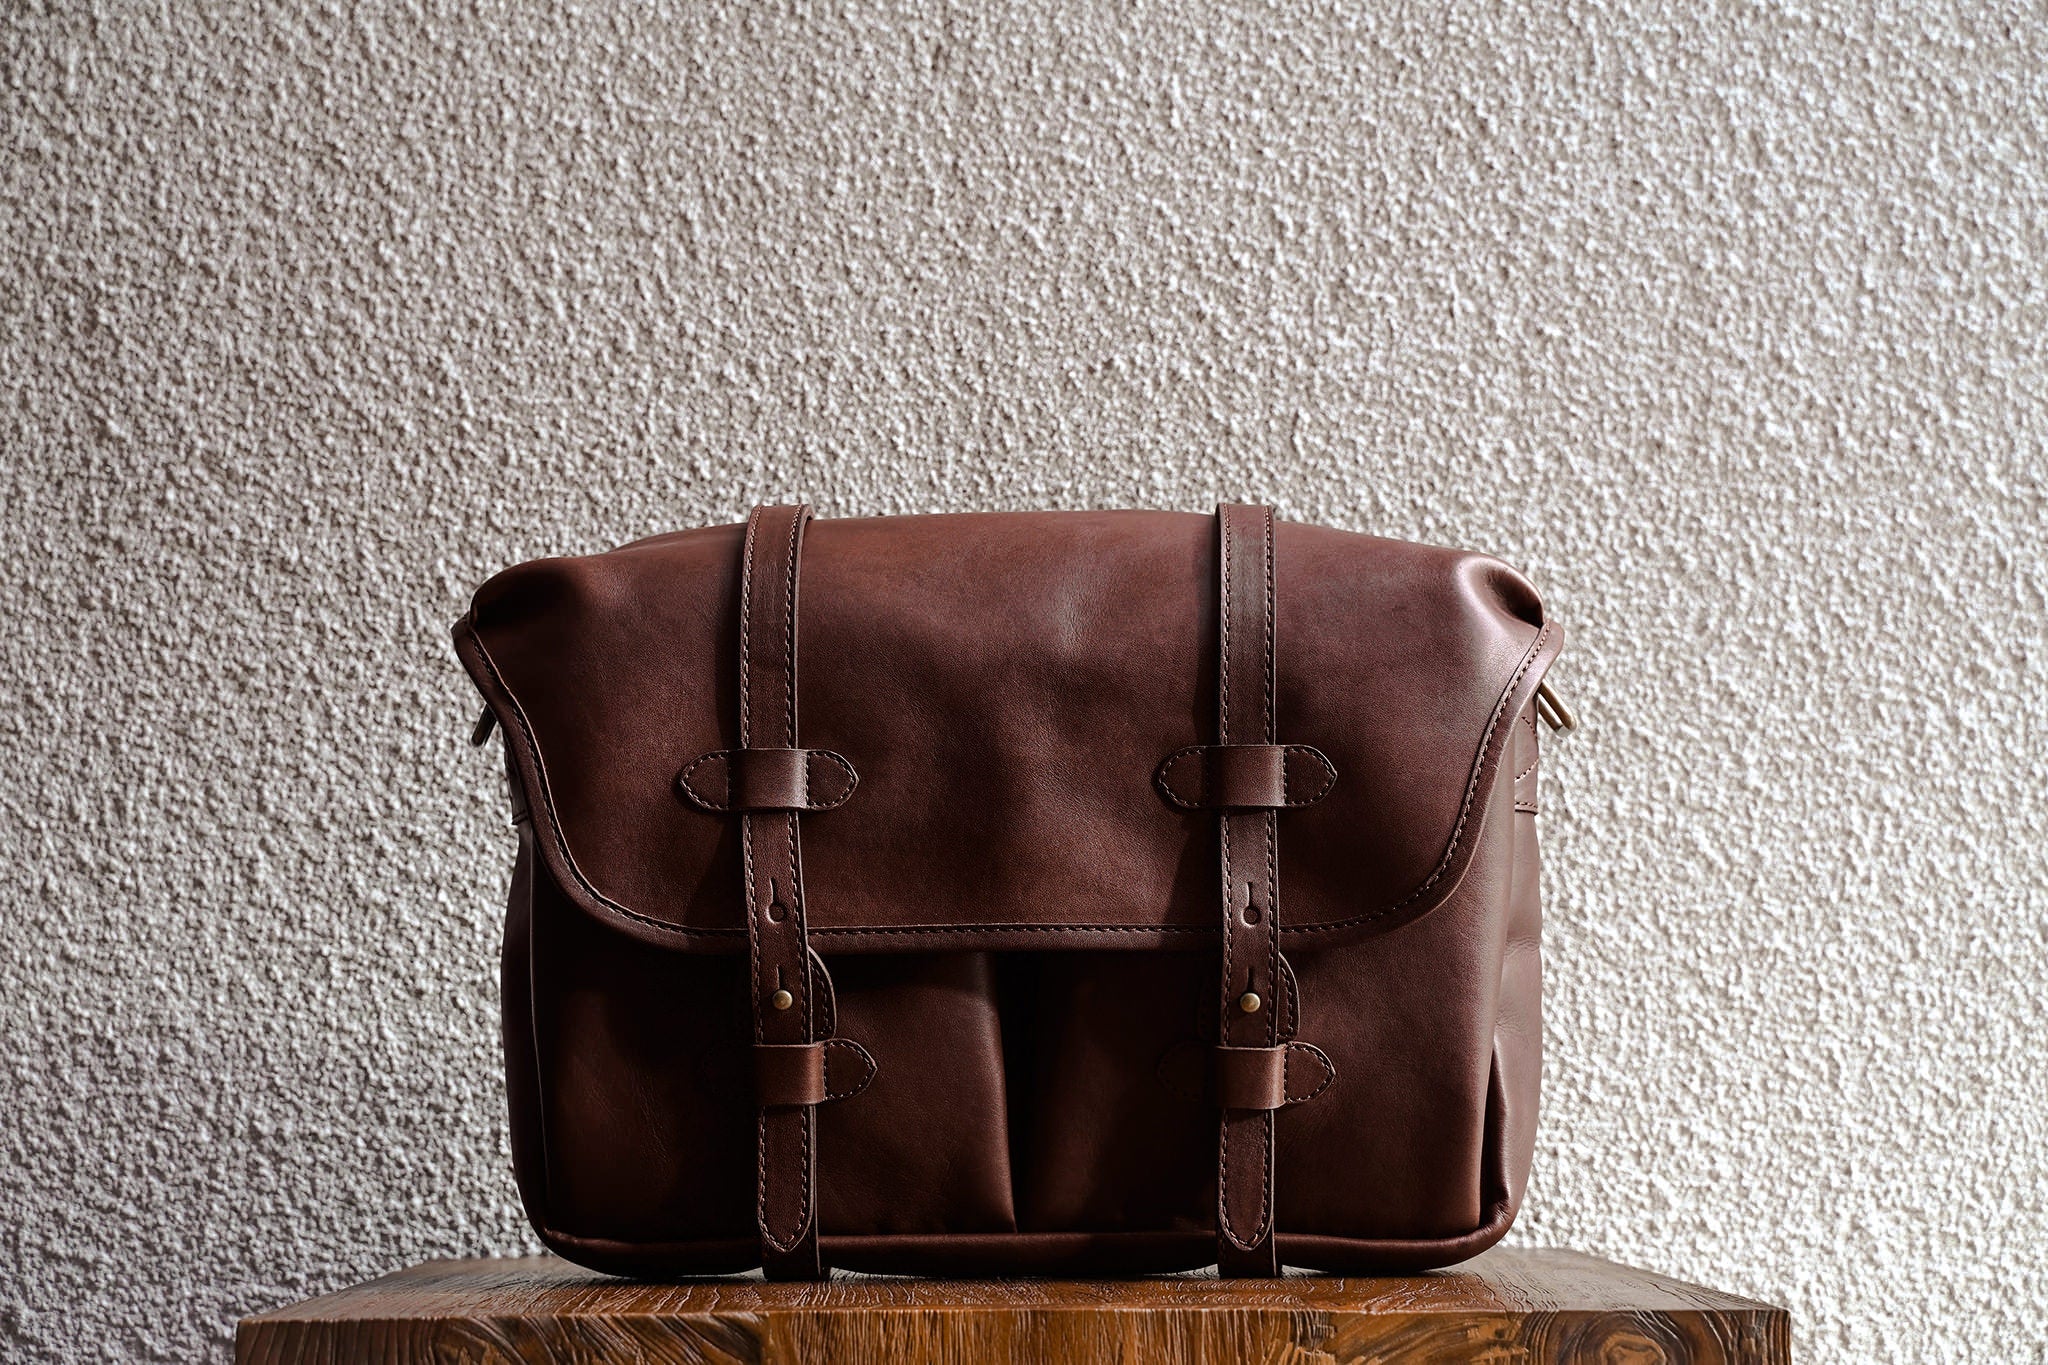 Our bags are made from as few leather pieces as possible. Fewer seams makes for a stronger bag.